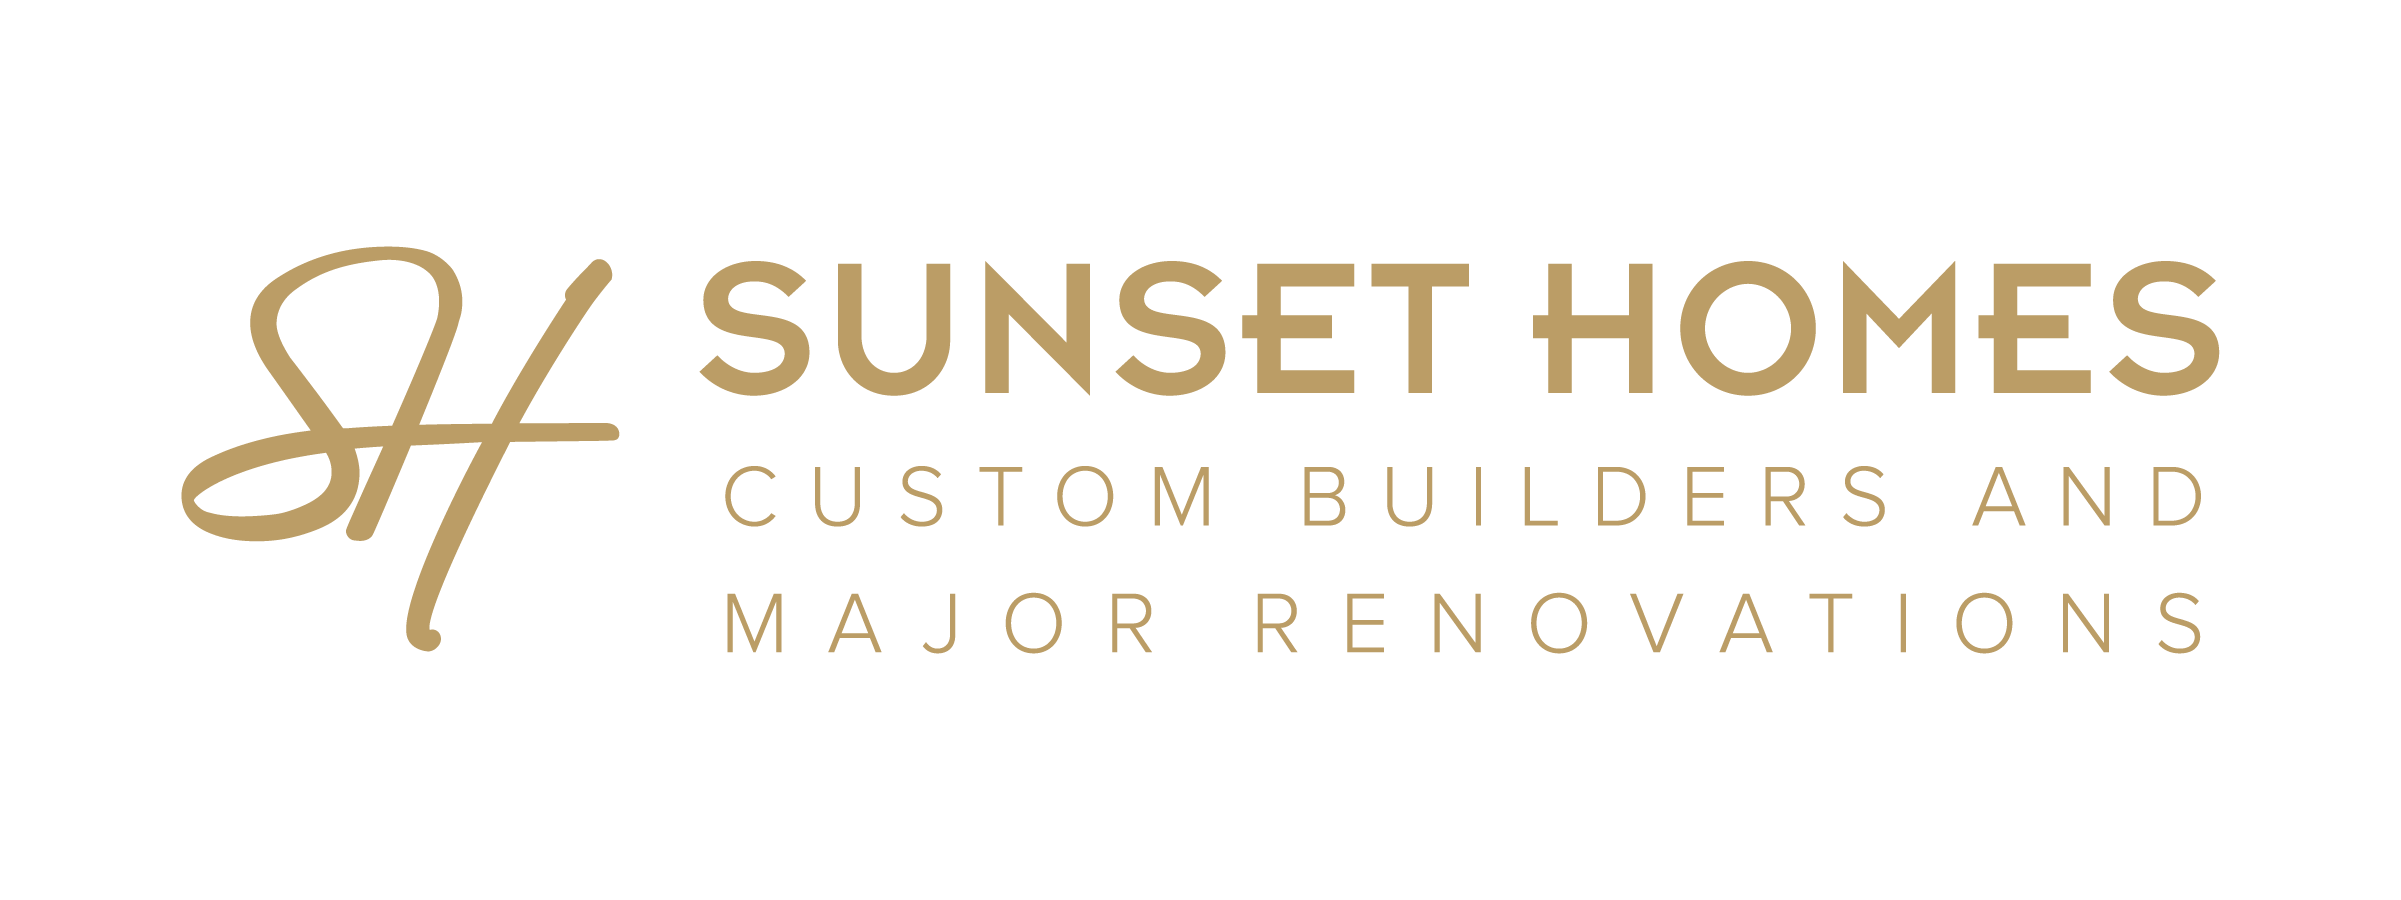 Sunset Homes Logo Gold Icon and Text